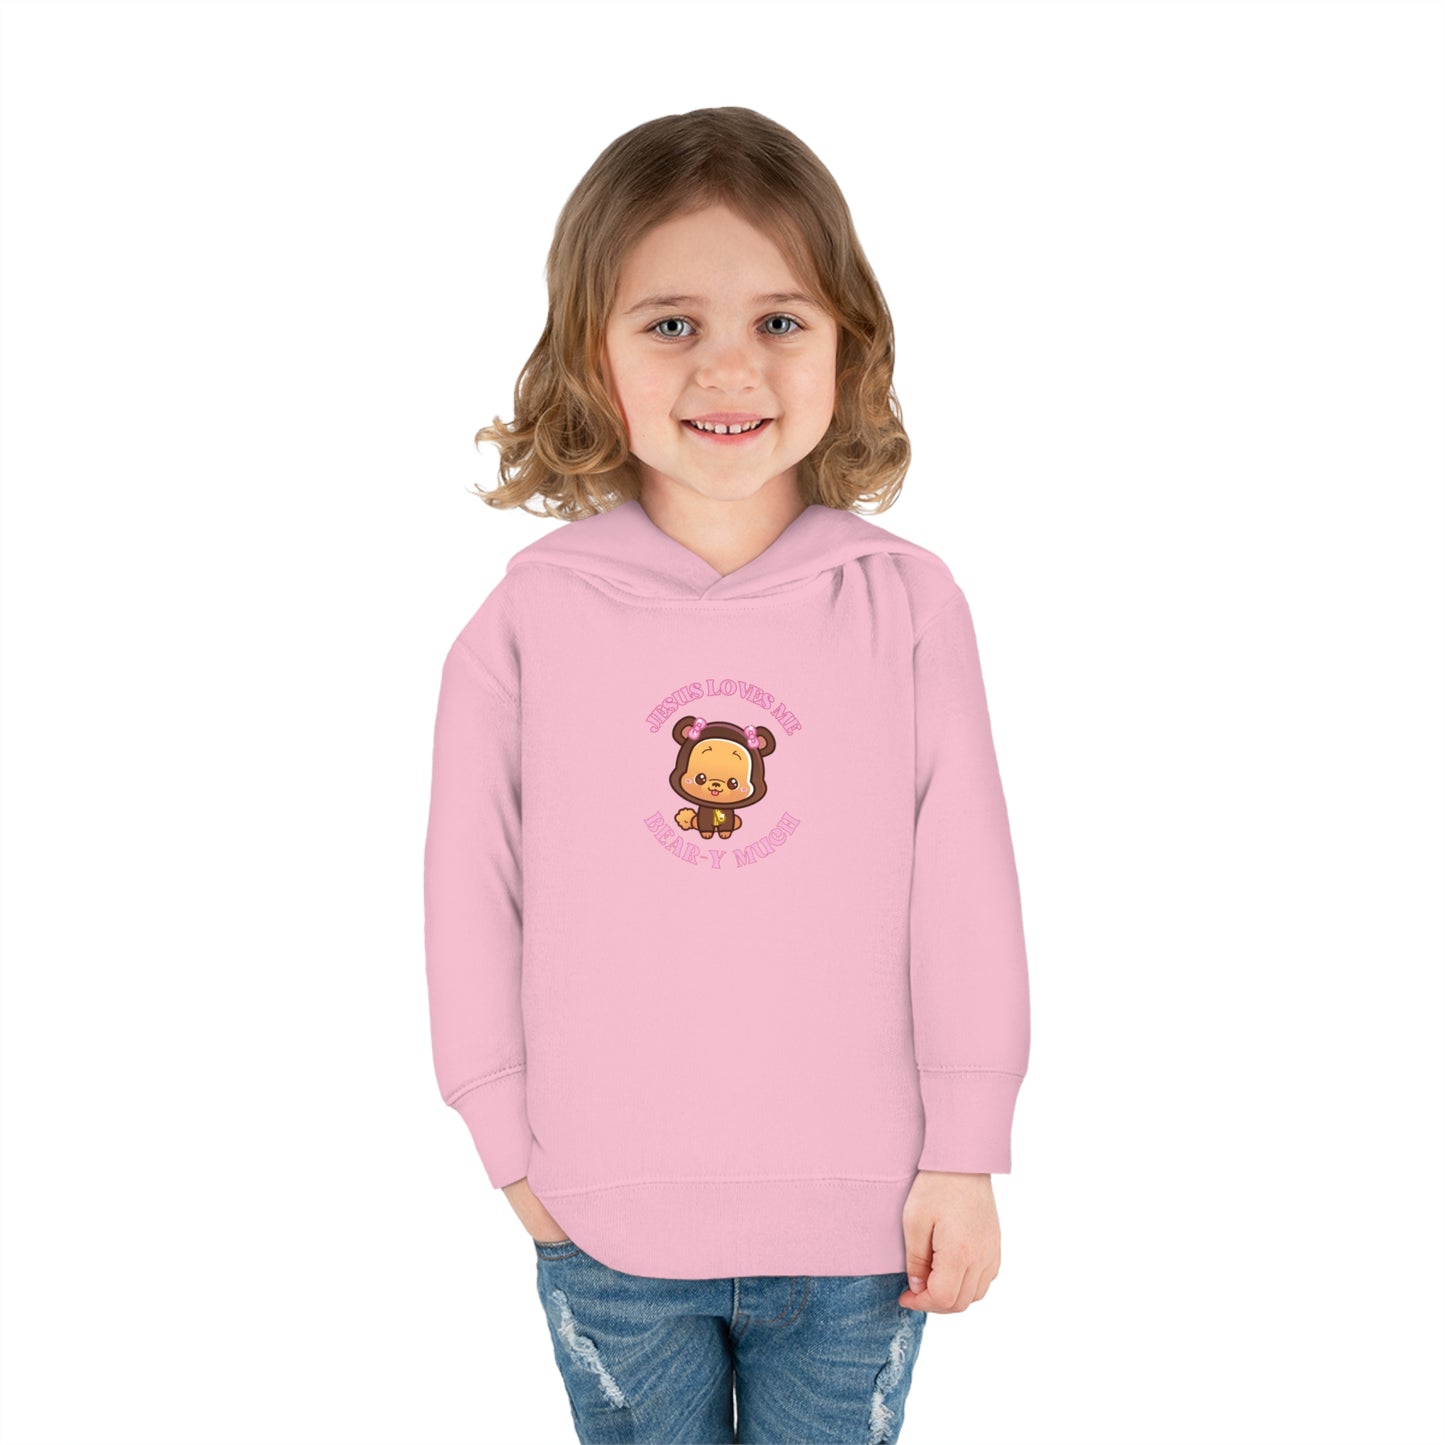 Jesus Loves Me Beary Much Kids Pullover Fleece Hoodie, Christian Pullover for Kids, Jesus Hoodie, Toddler & Youth Faith Apparel